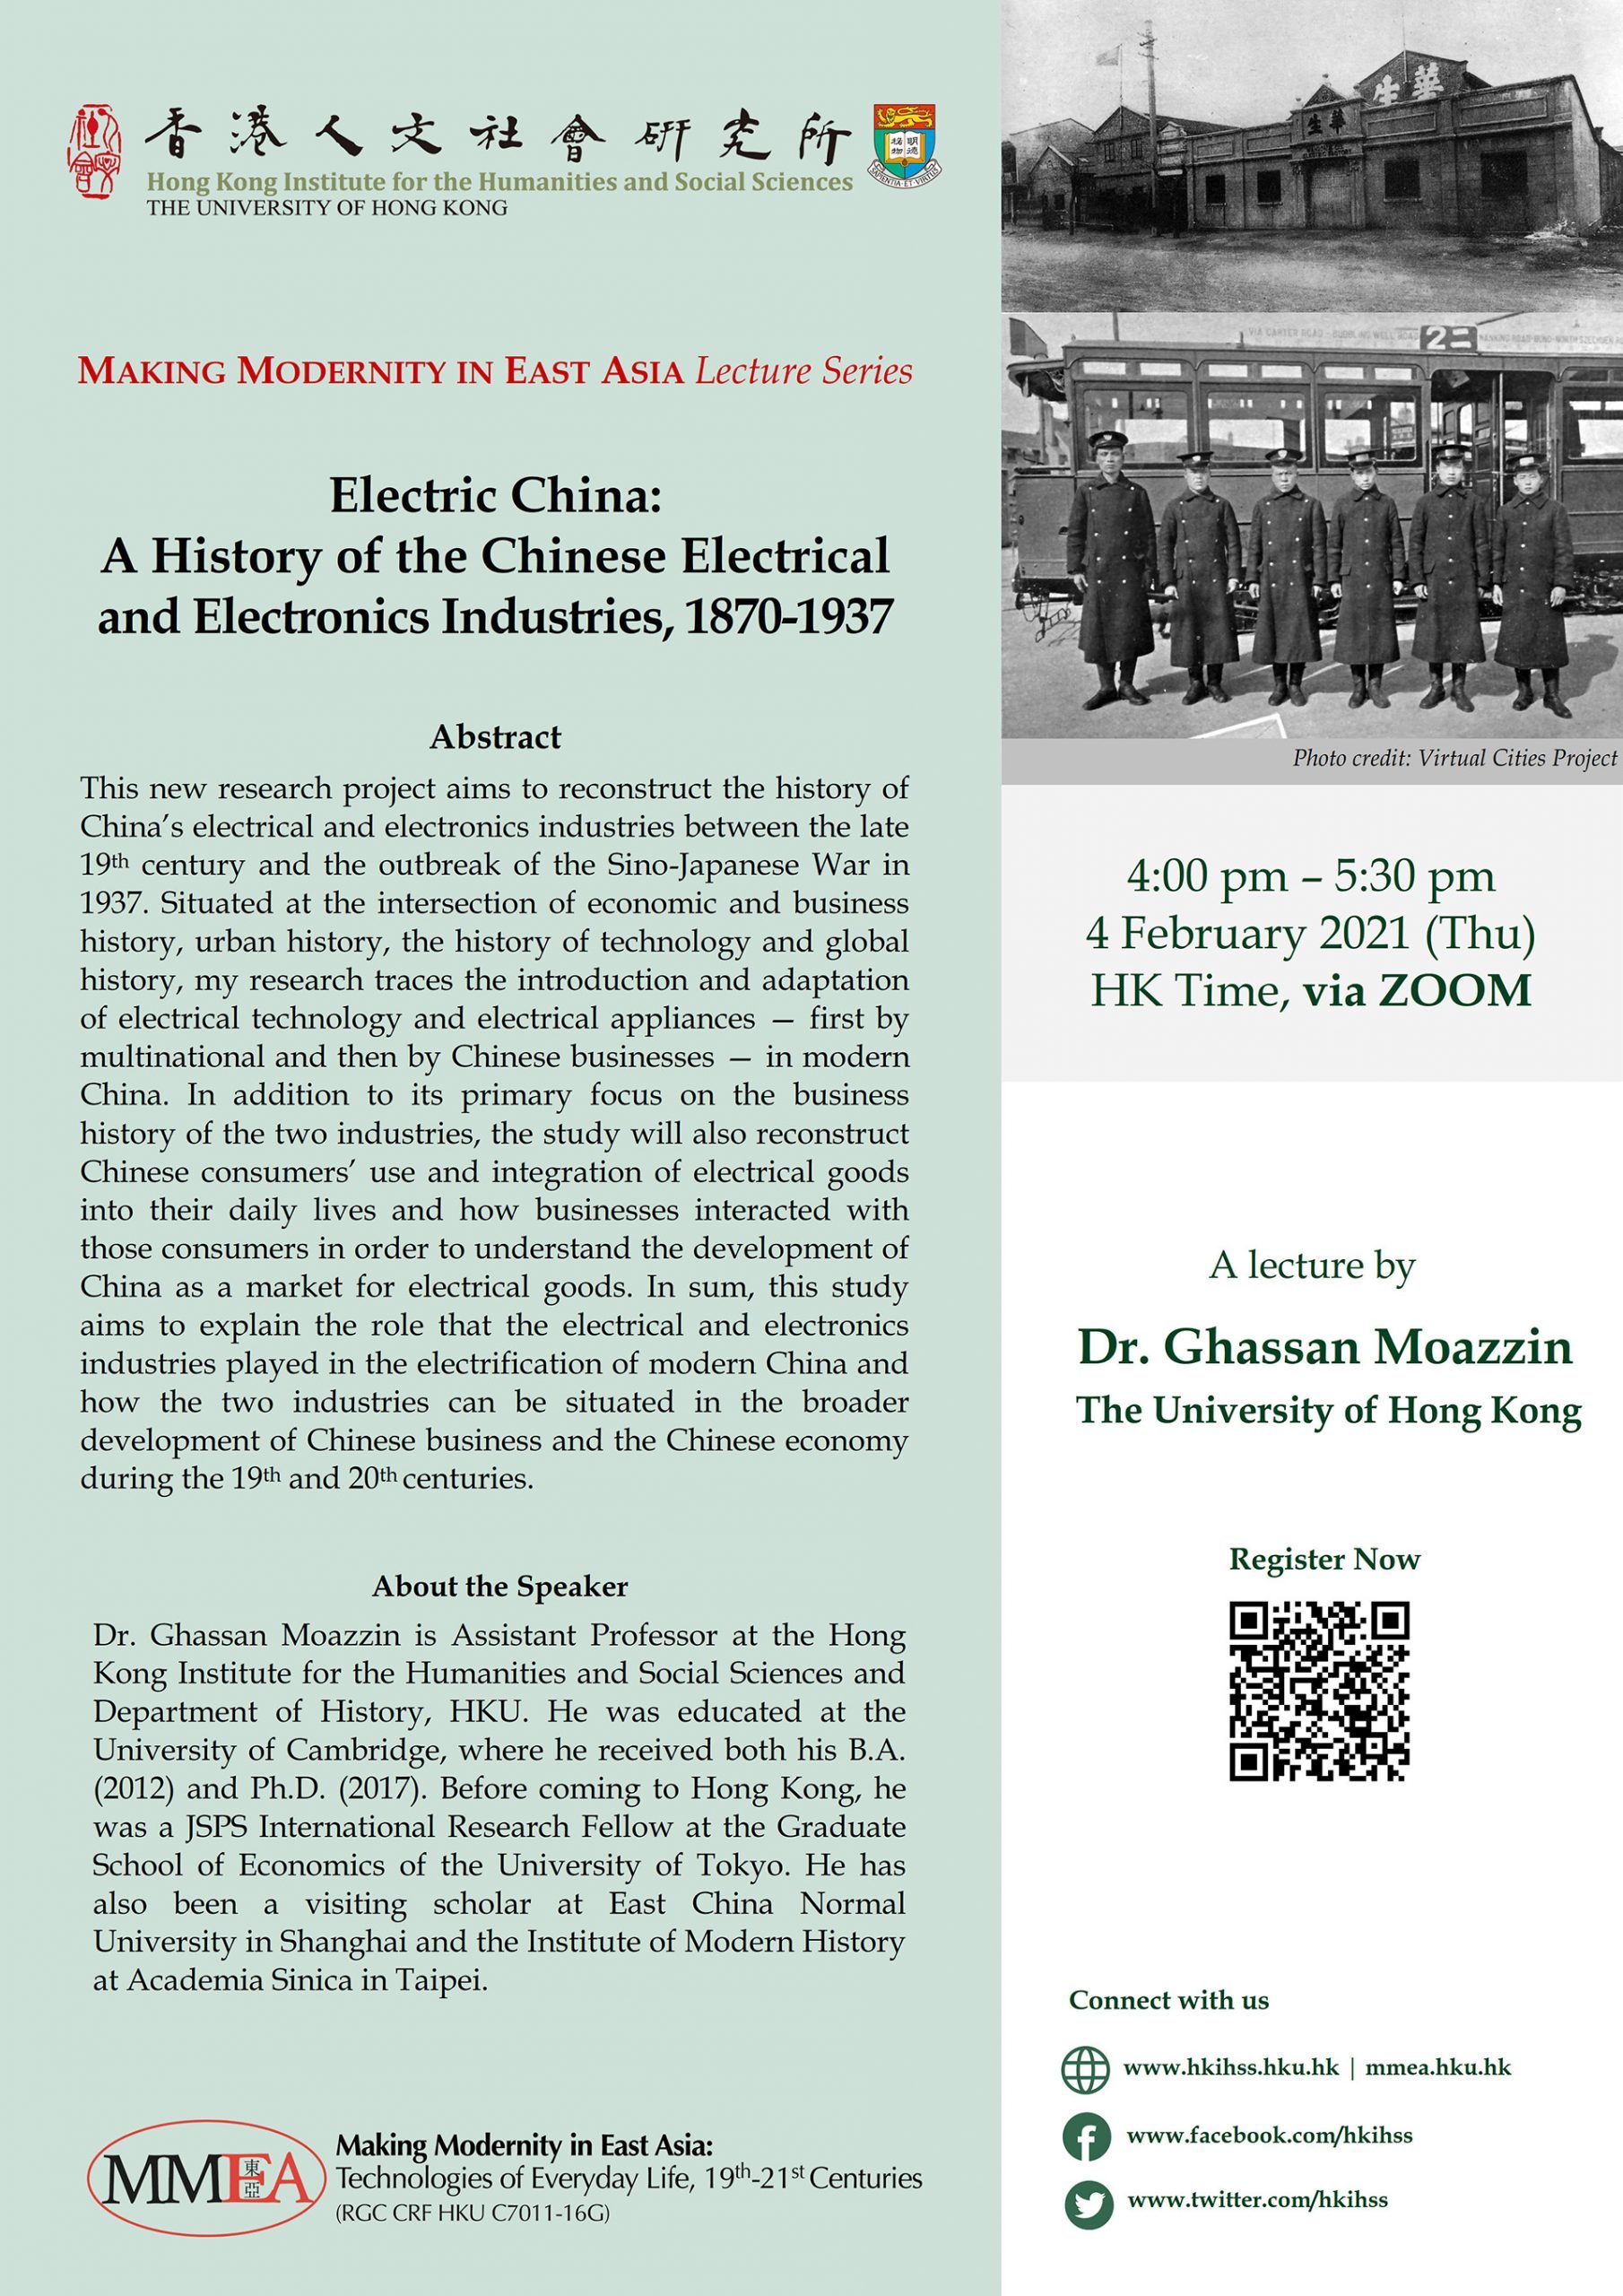 MMEA Lecture Series “Electric China: A History of the Chinese Electrical and Electronics Industries, 1870-1937” by Dr. Ghassan Moazzin (February 4, 2021)